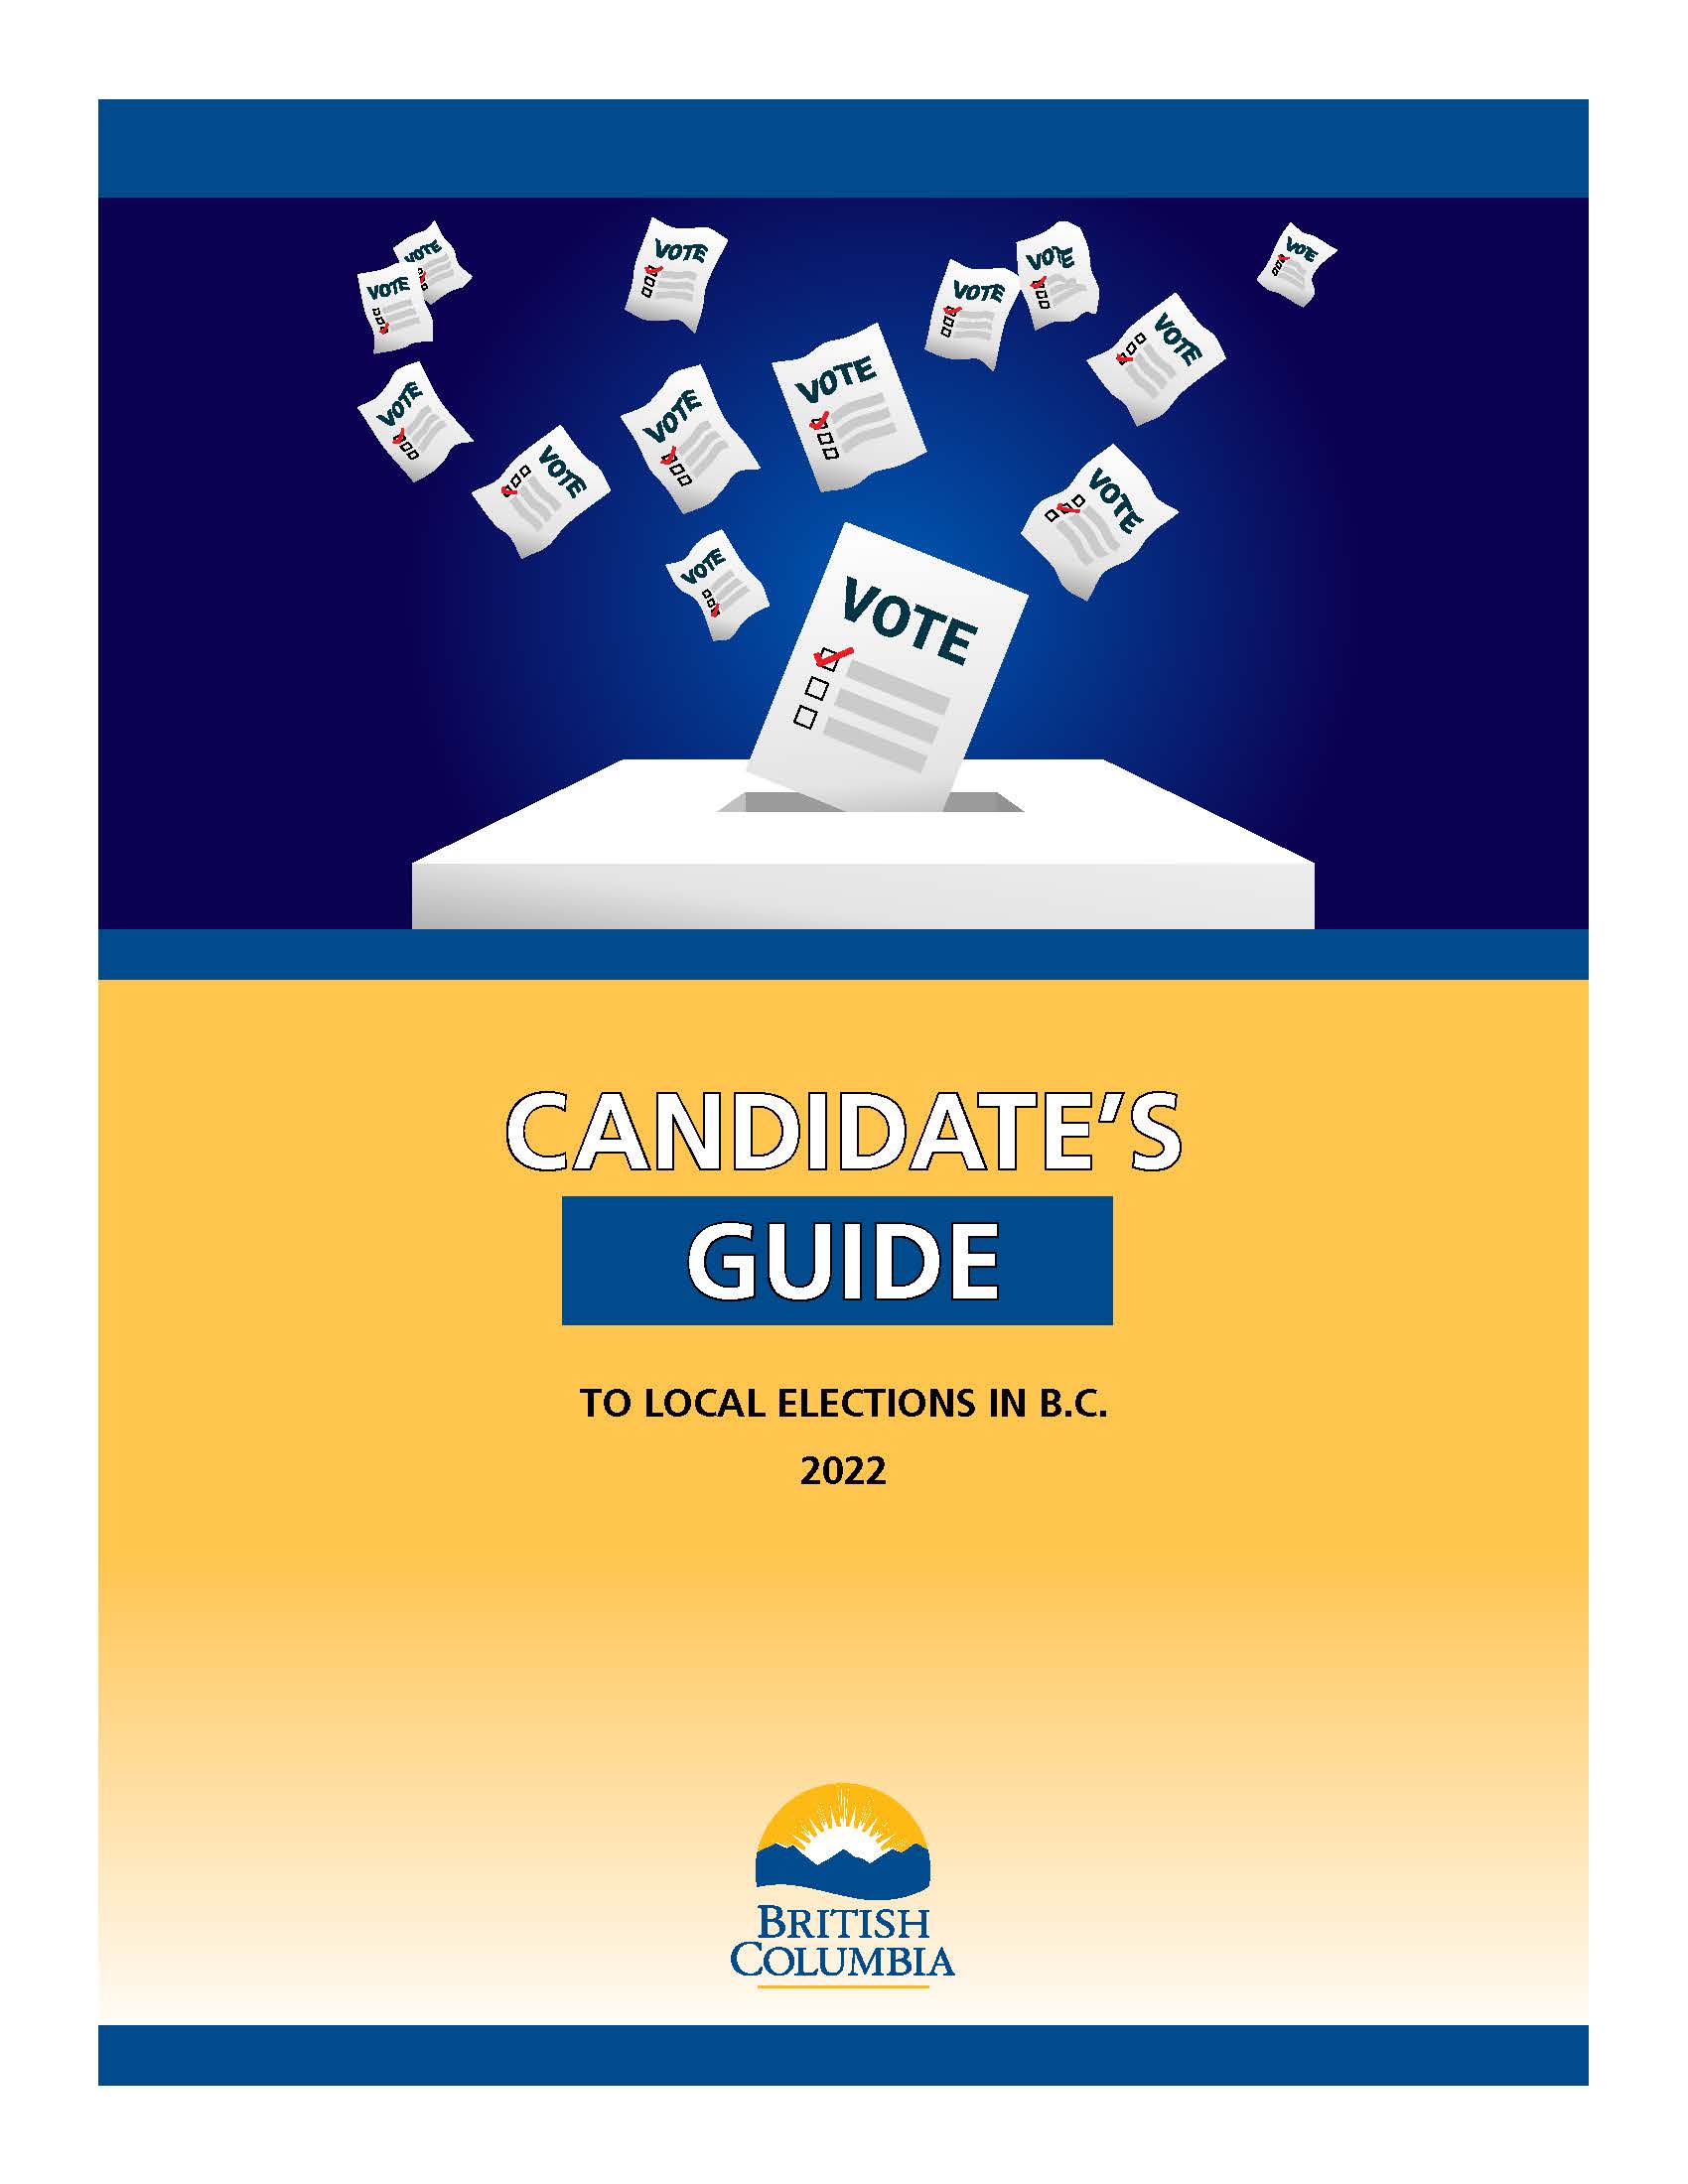 Cover of the Candidate's Guide to Local Elections in B.C.